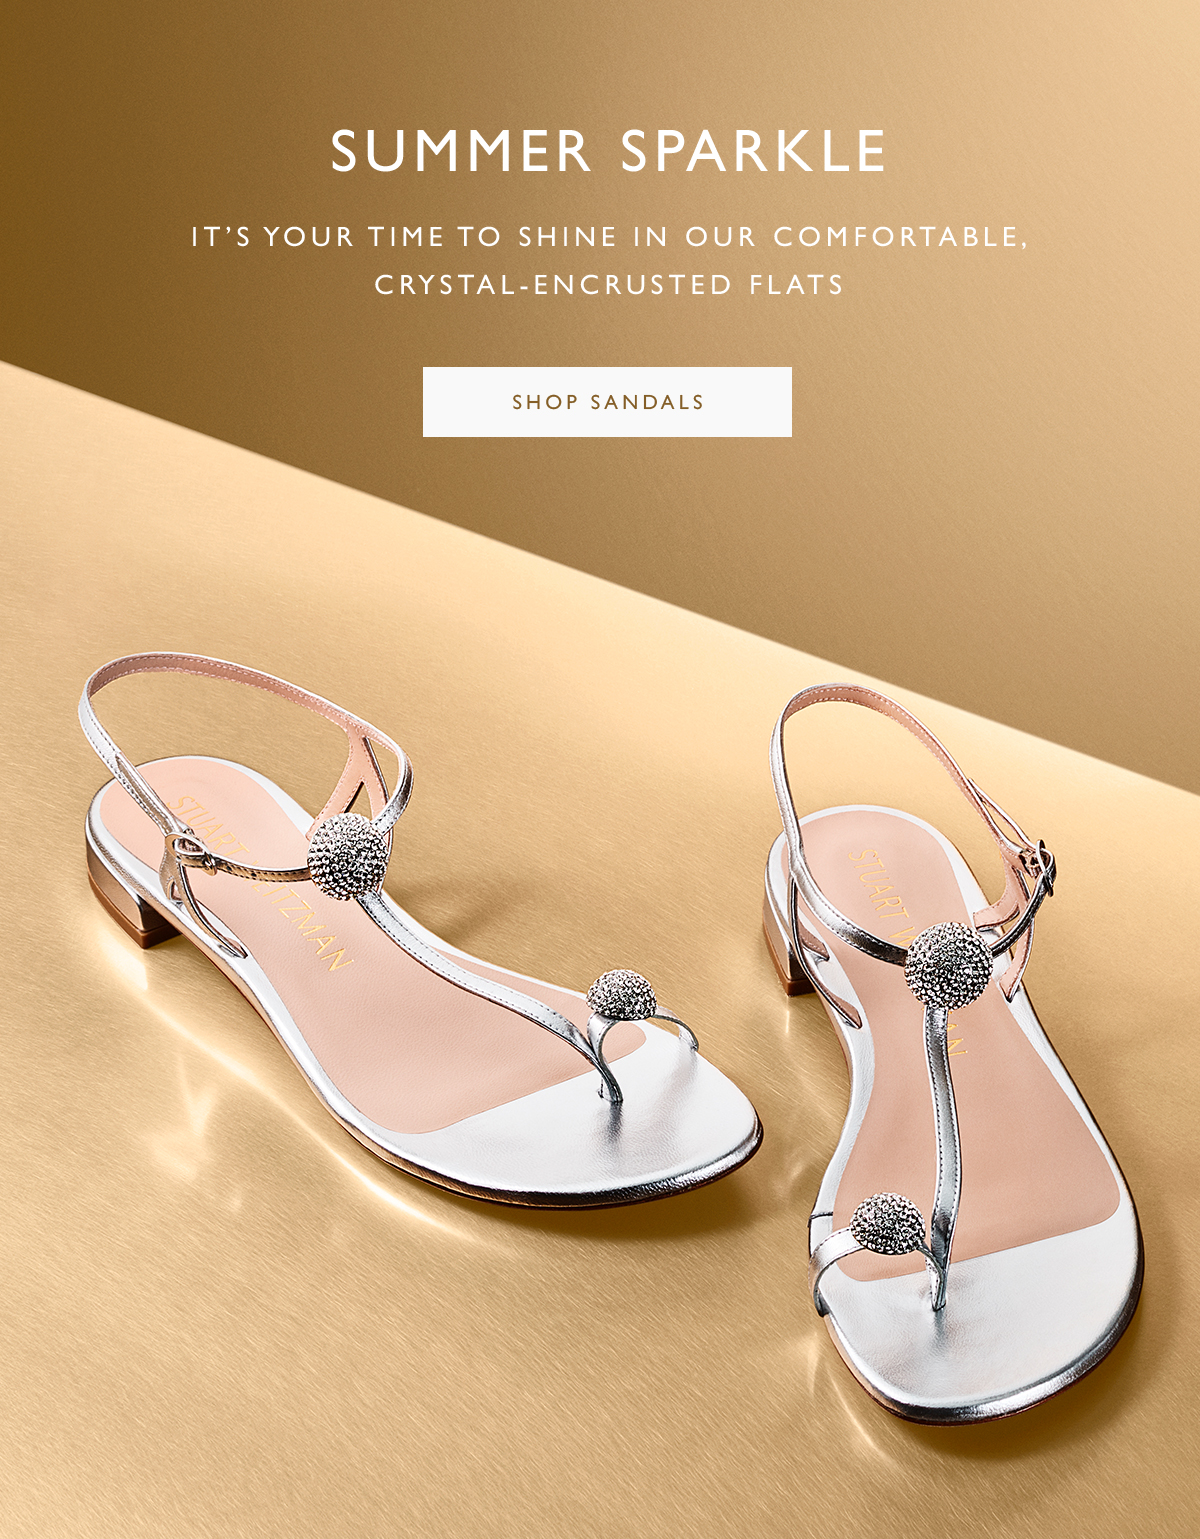 Summer Sparkle. It’s your time to shine in our comfortable, crystal-encrusted flats. SHOP SANDALS